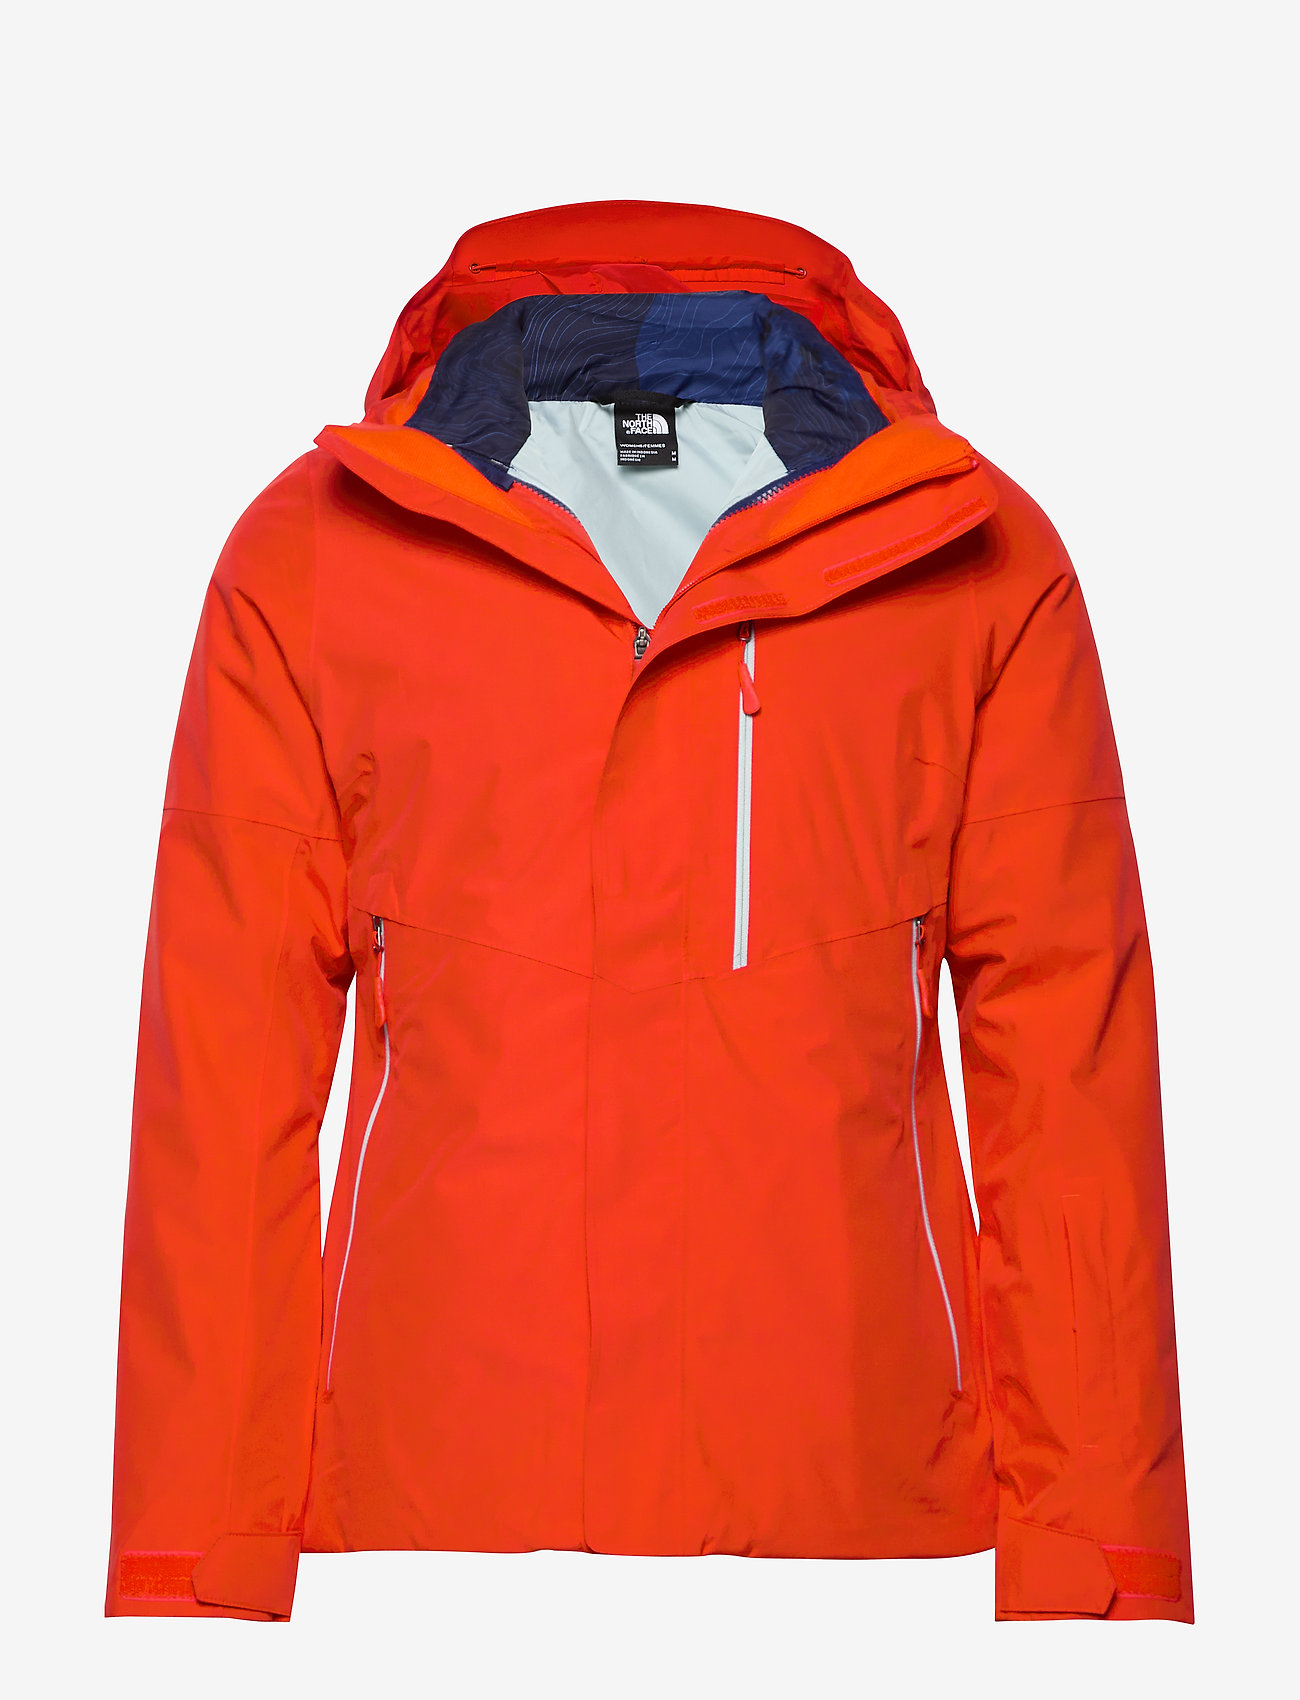 north face garner triclimate mens